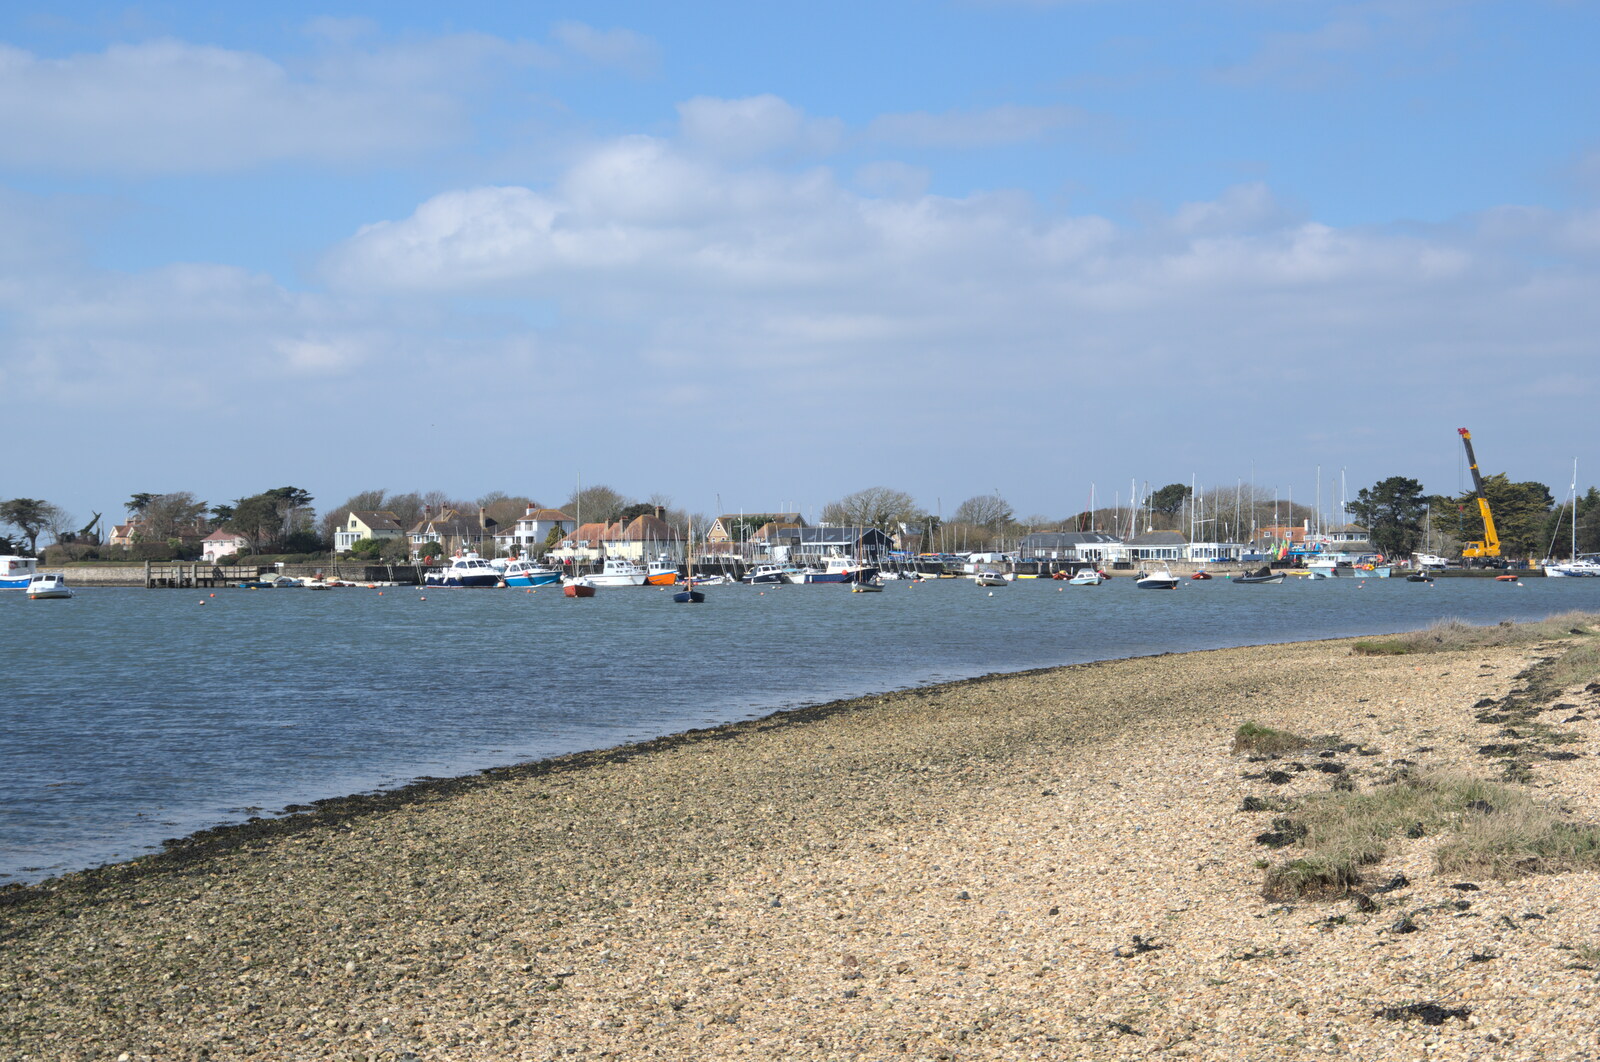 Keyhaven and its forest of boat masts from A Day in New Milton, Hampshire - 3rd April 2023